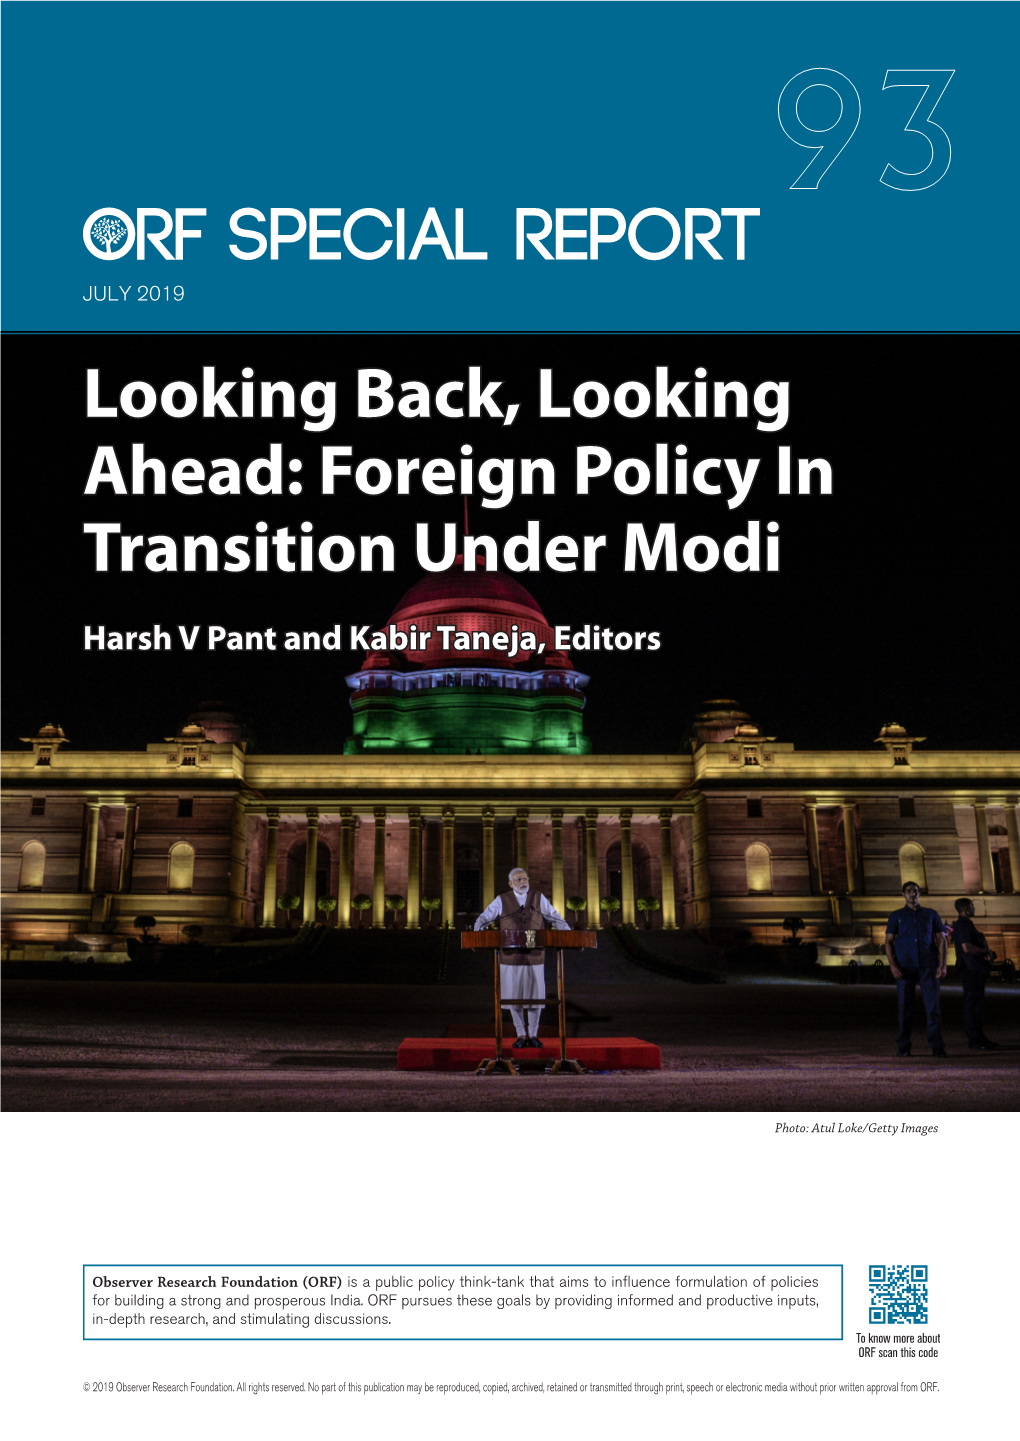 Foreign Policy in Transition Under Modi